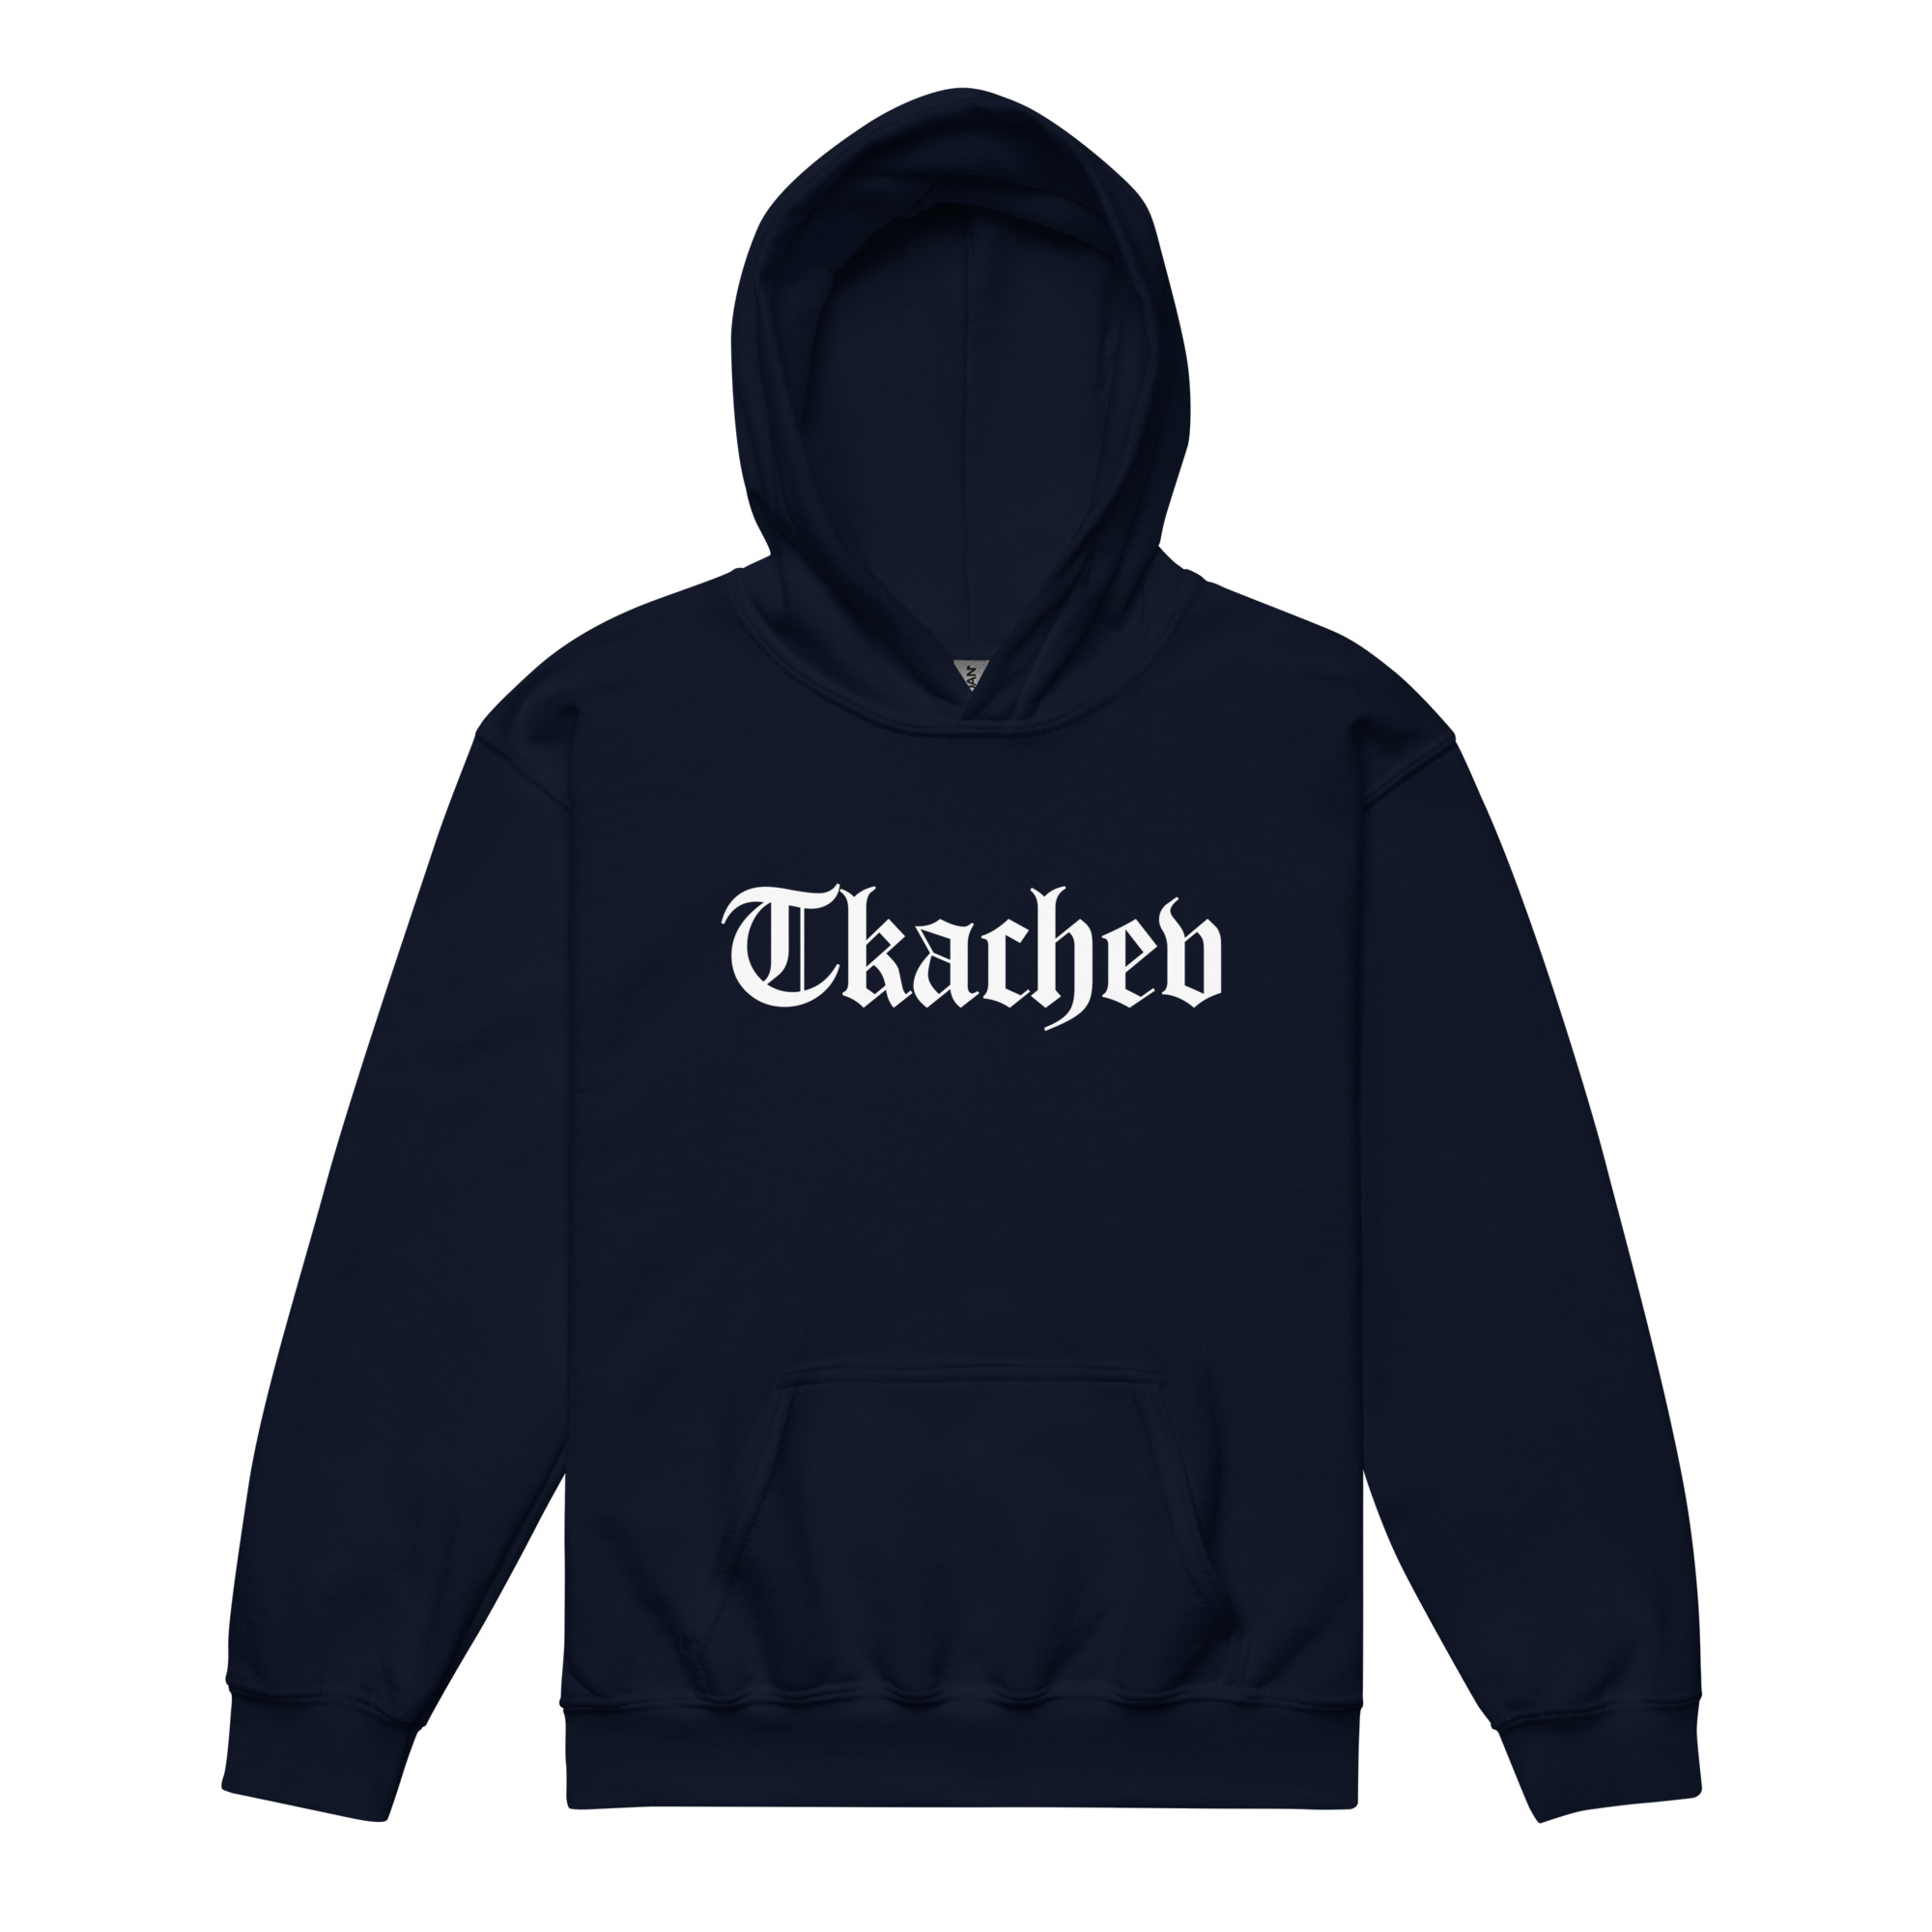 youth-heavy-blend-hoodie-navy-front-6559ad068e572.jpg